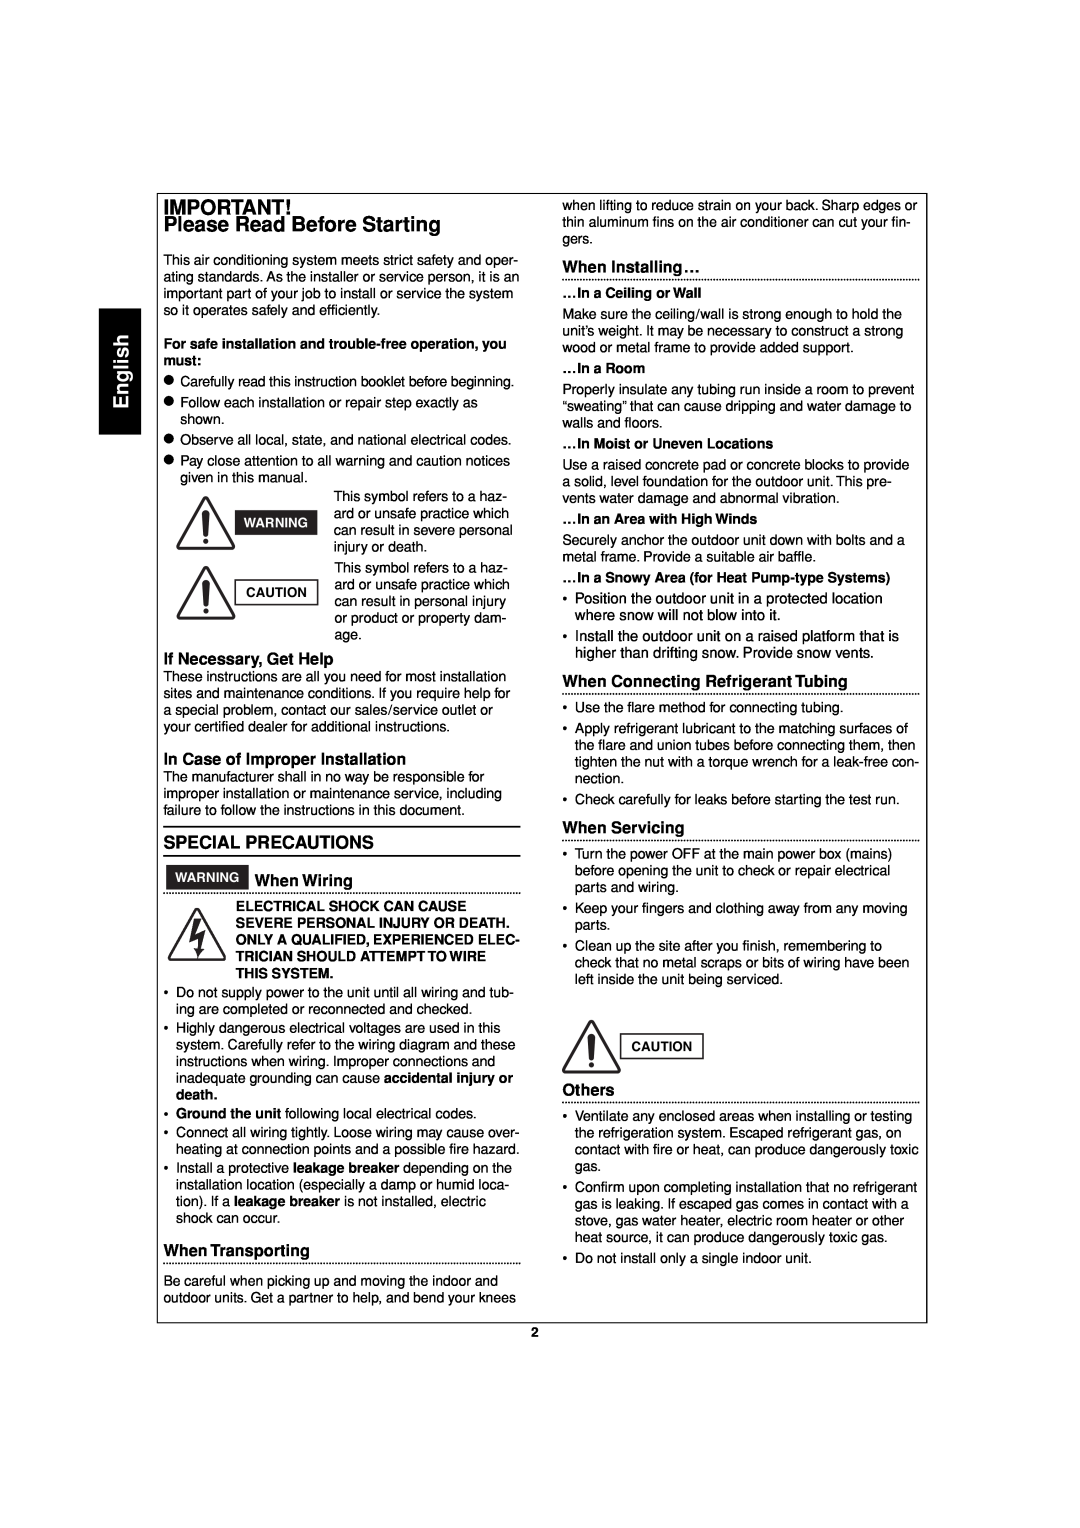 Sanyo SAP-CMRV1426EH-F English, Please Read Before Starting, When Installing…, If Necessary, Get Help, WARNING When Wiring 